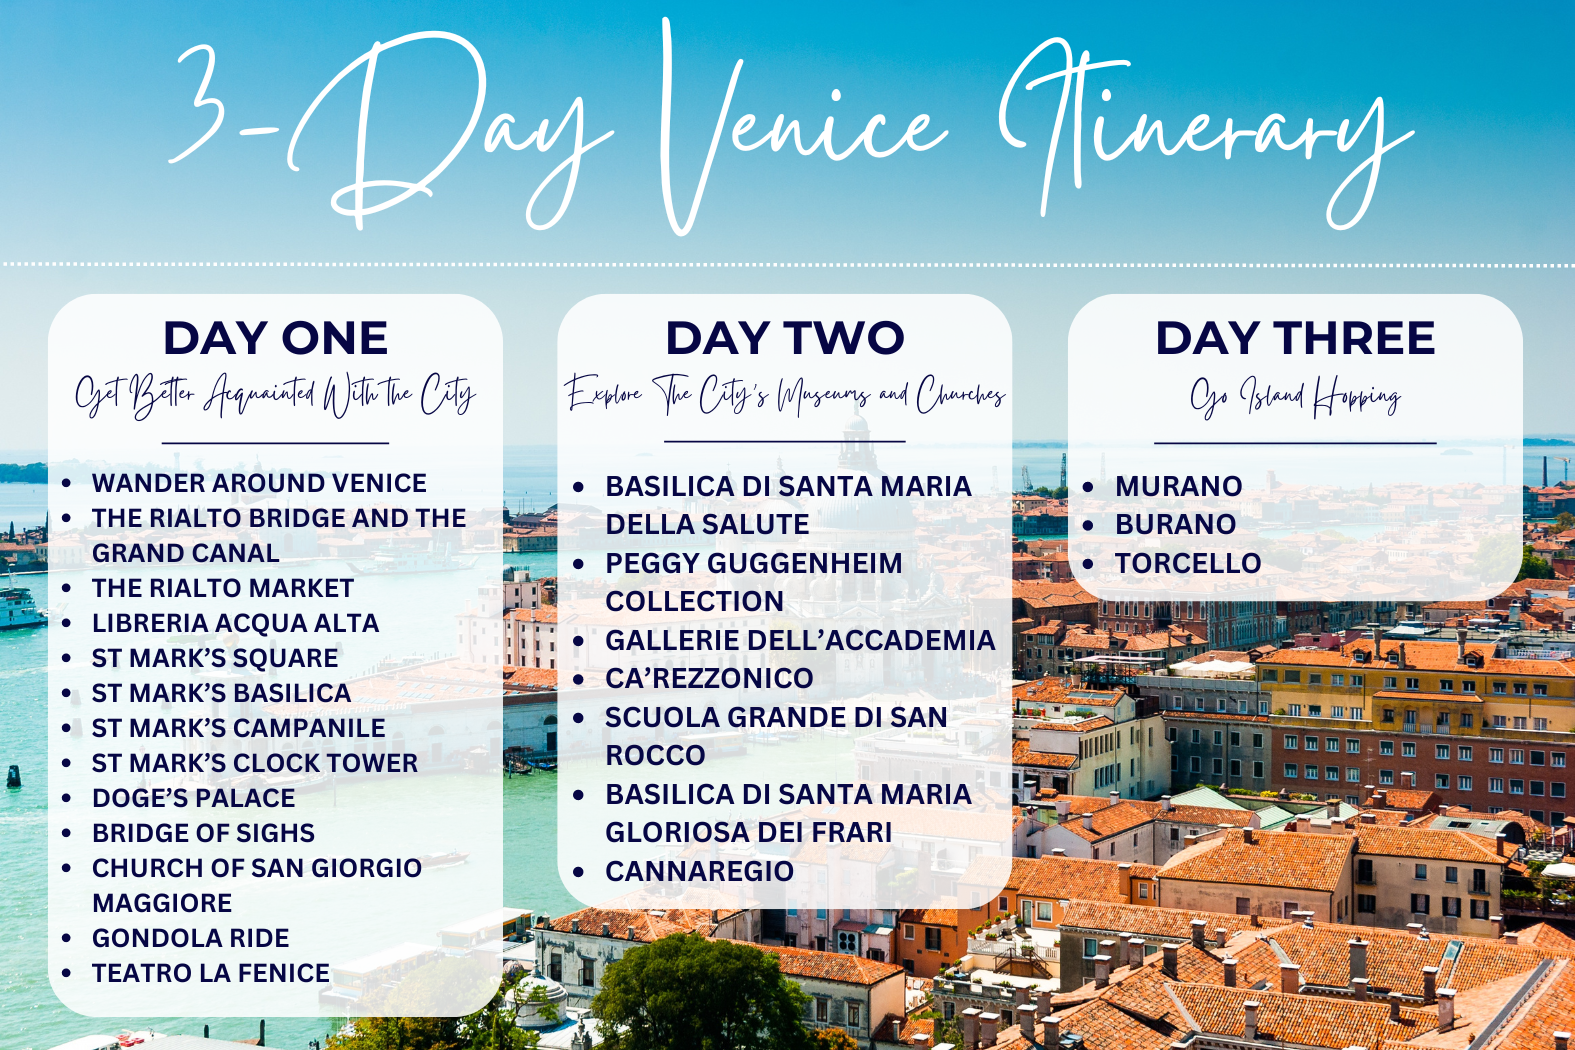 3 Day Venice Itinerary Overview